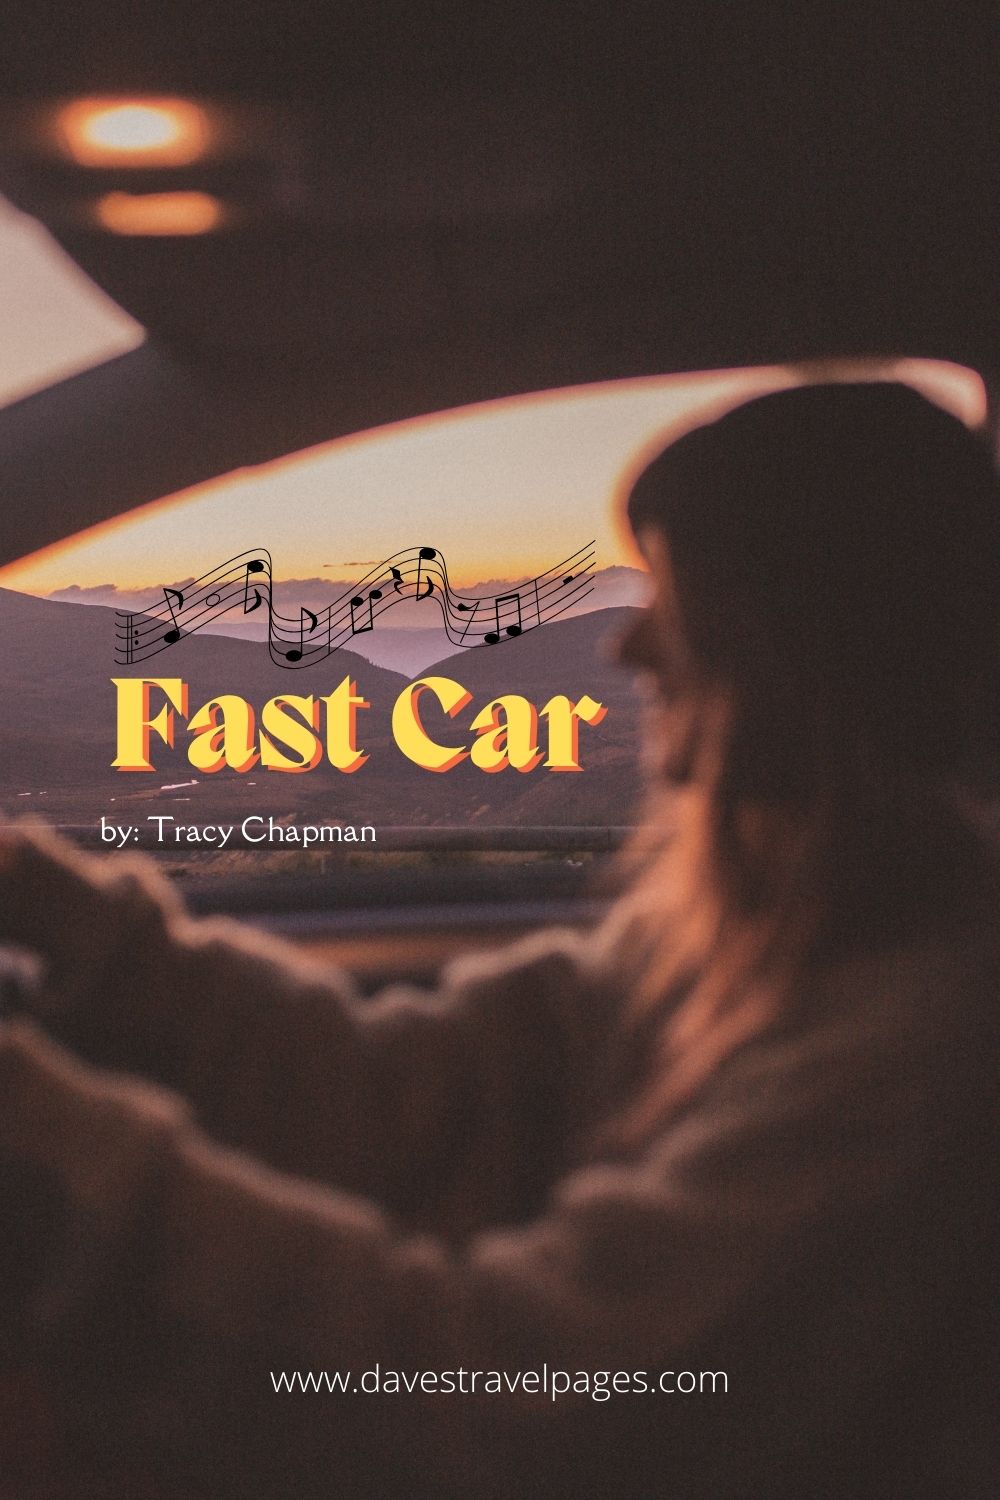 Road trip songs: “Fast Car” by Tracy Chapman